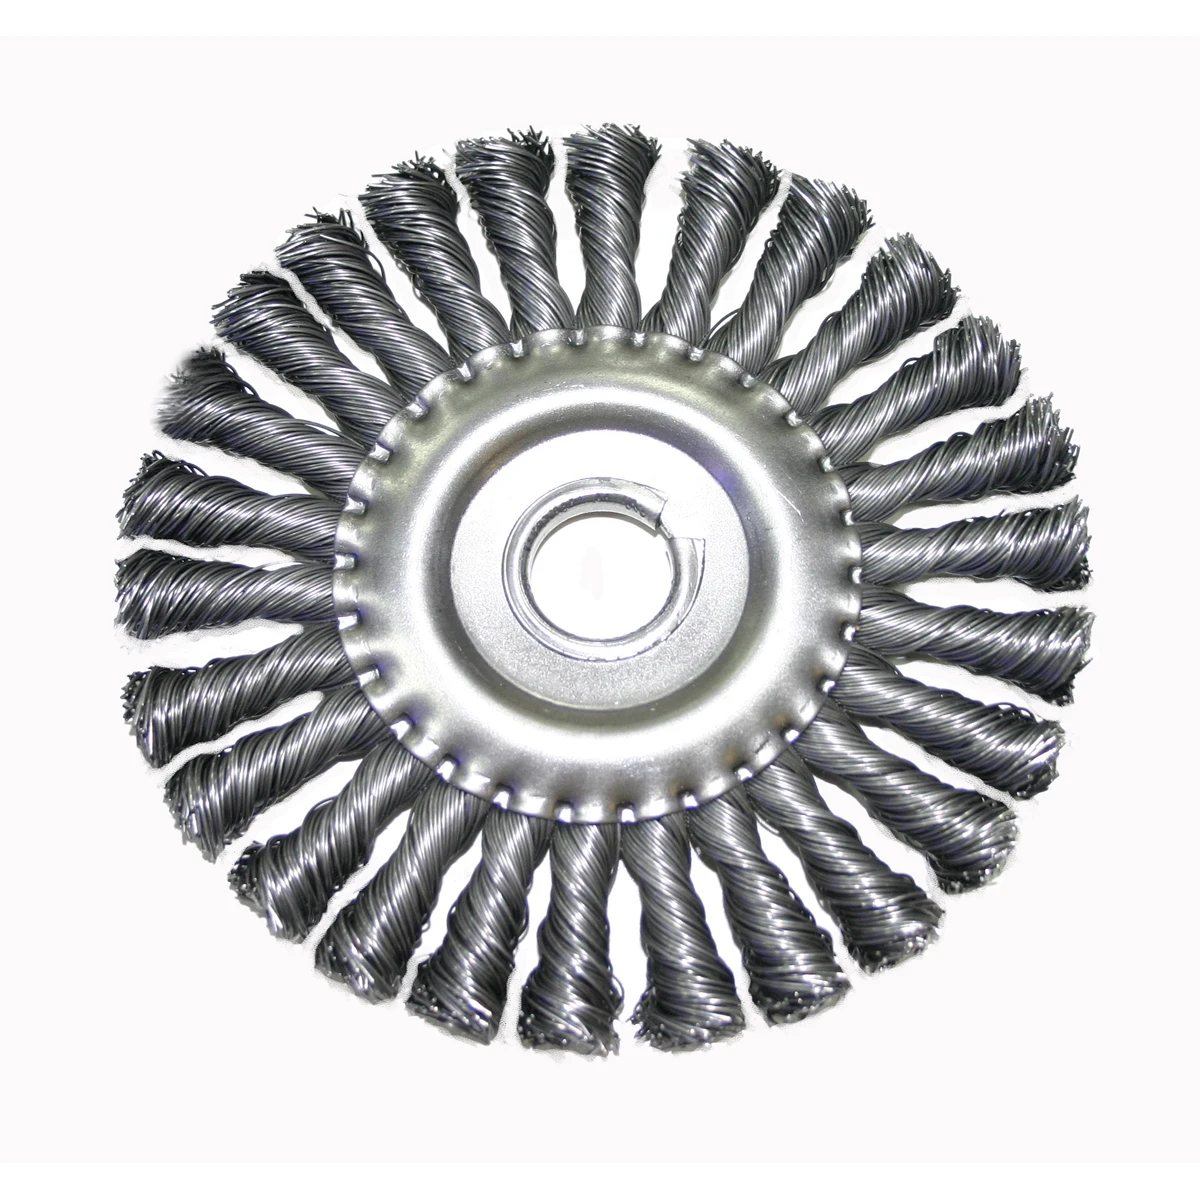 Good quality disc brush stainless steel, spin brush